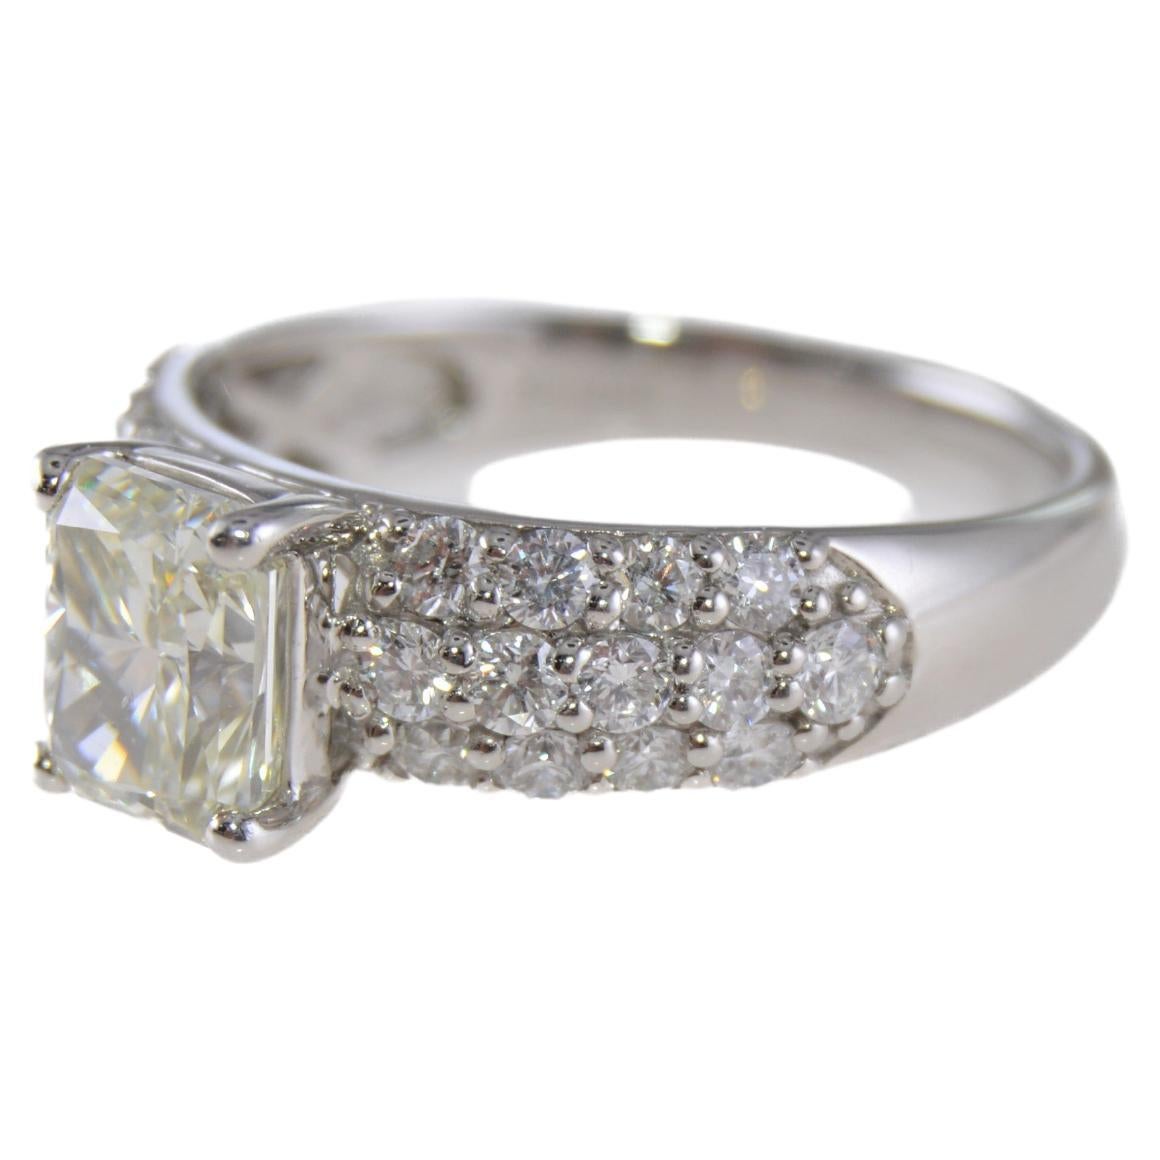 STYLE / REFERENCE: Art Deco 
METAL / MATERIAL: Platinum
CIRCA / YEAR: Estate 
ACCENT STONES / WEIGHT: 
SIZE: 6 1/4


Hand constructed in Platinum, this beautiful engagement ring featured a 1.51ct Radiant cut diamond and several rows of pave set